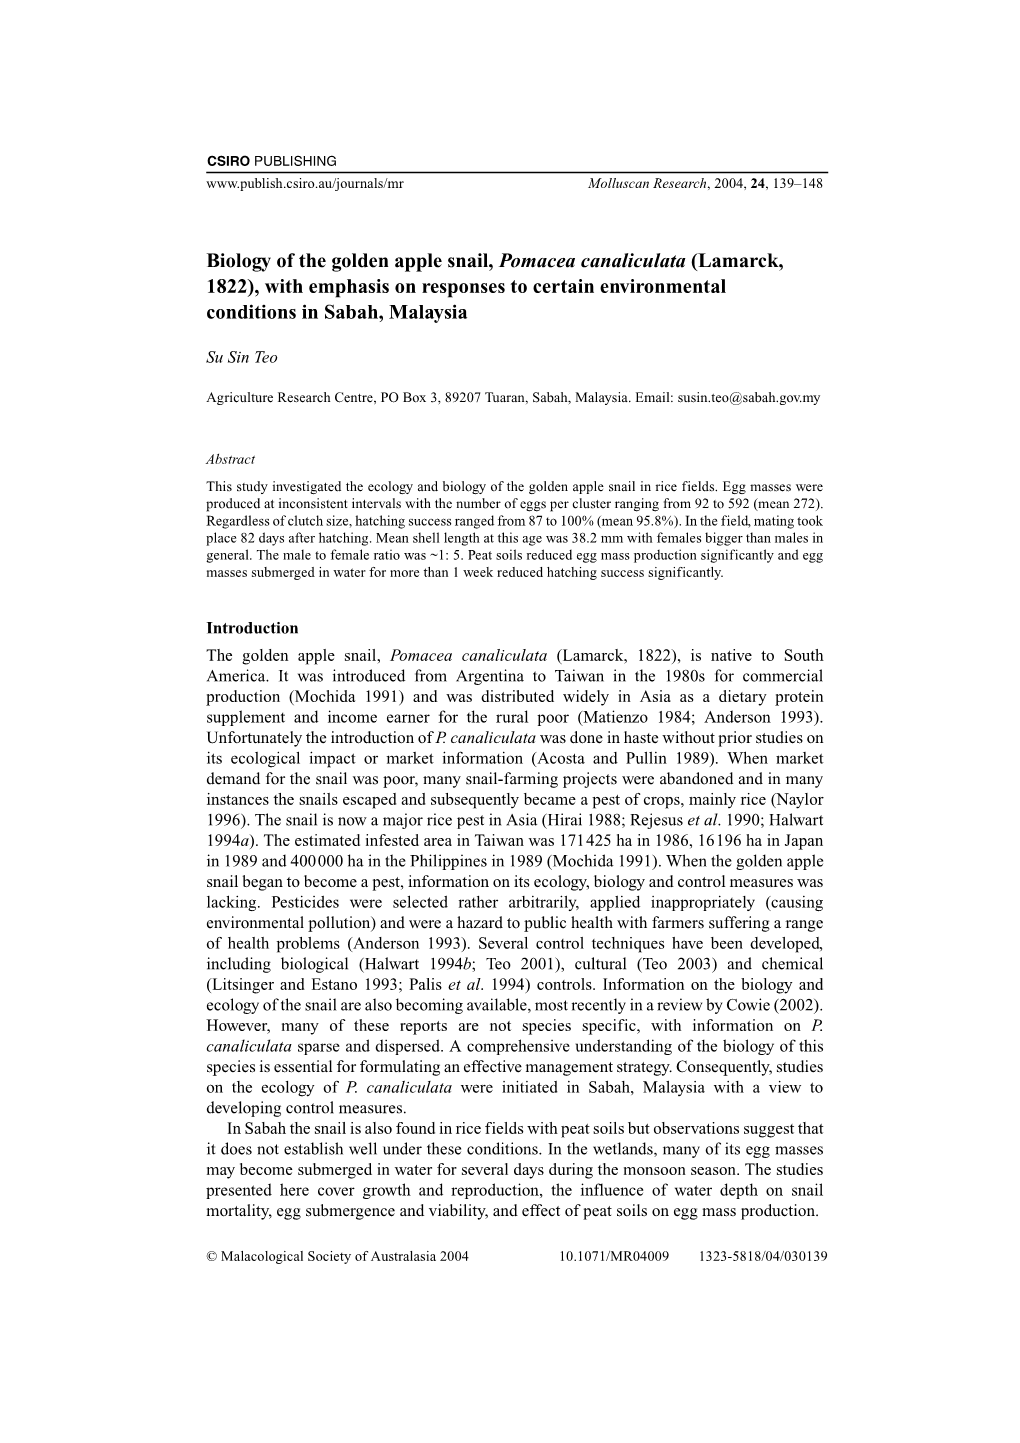 Biology of the Golden Apple Snail, Pomacea Canaliculata (Lamarck, 1822), with Emphasis on Responses to Certain Environmental Conditions in Sabah, Malaysia